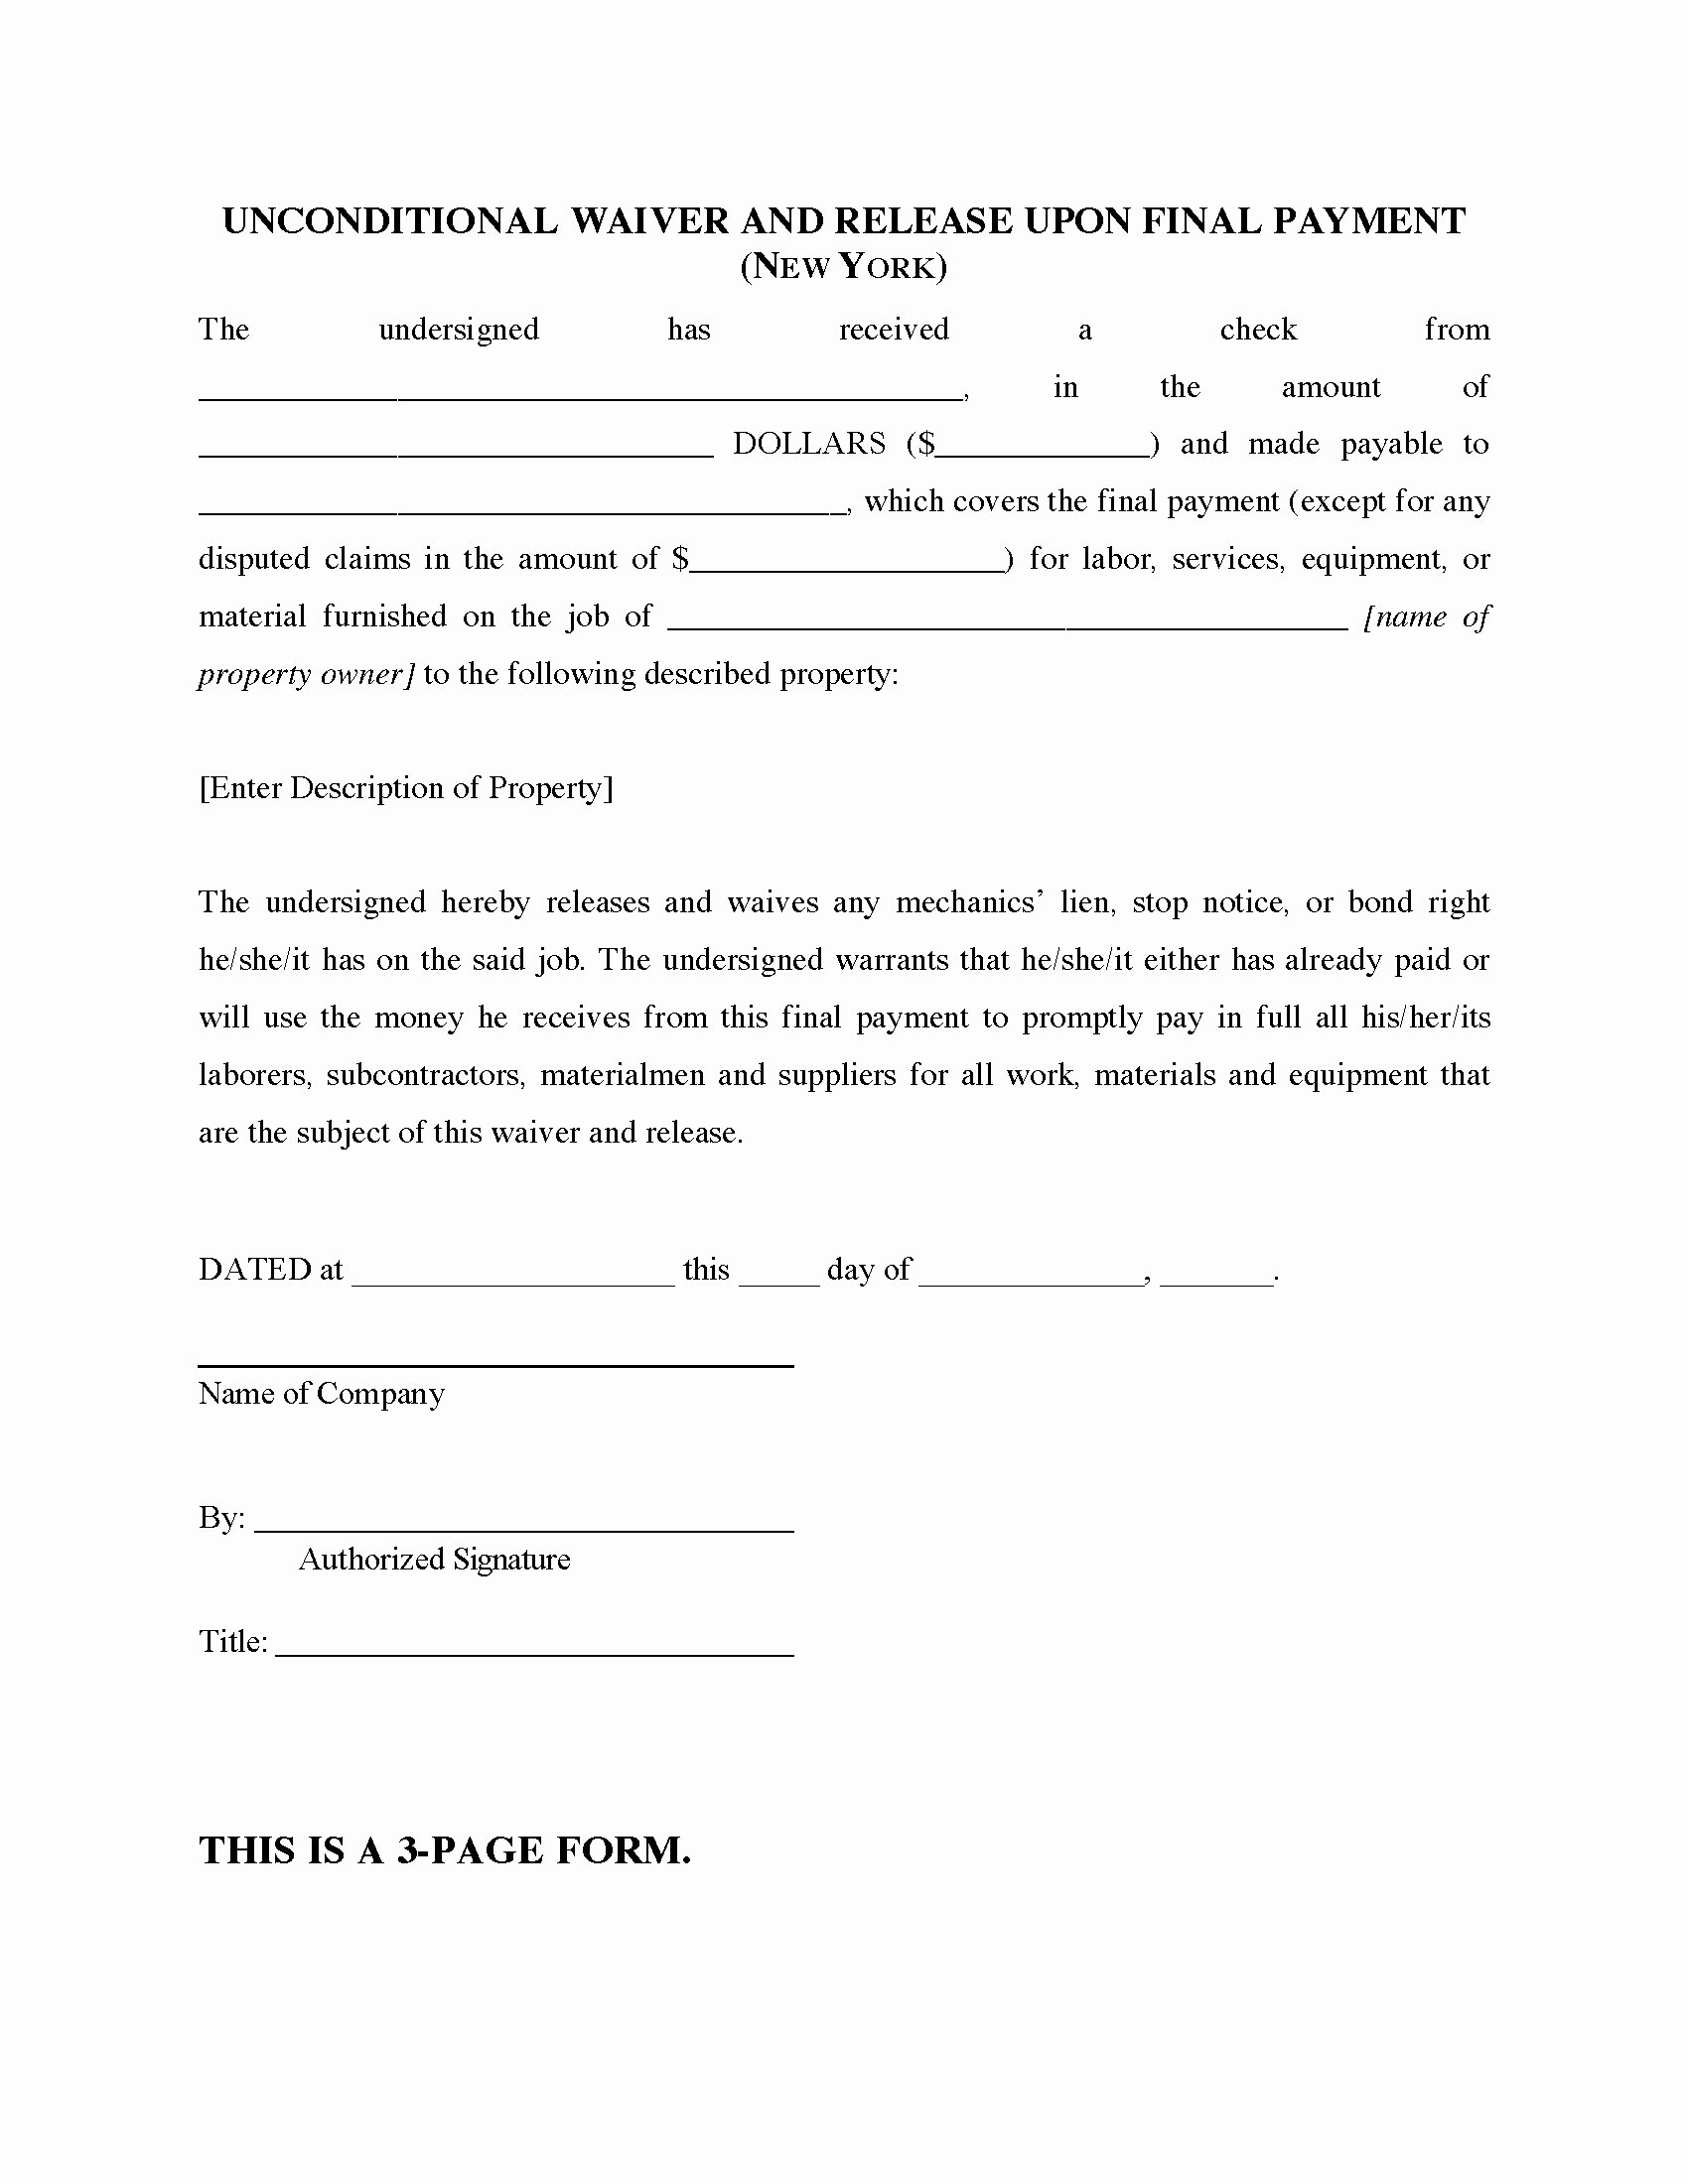 Final Lien Waiver Template Fresh New York Unconditional Waiver and Release Of Lien Upon